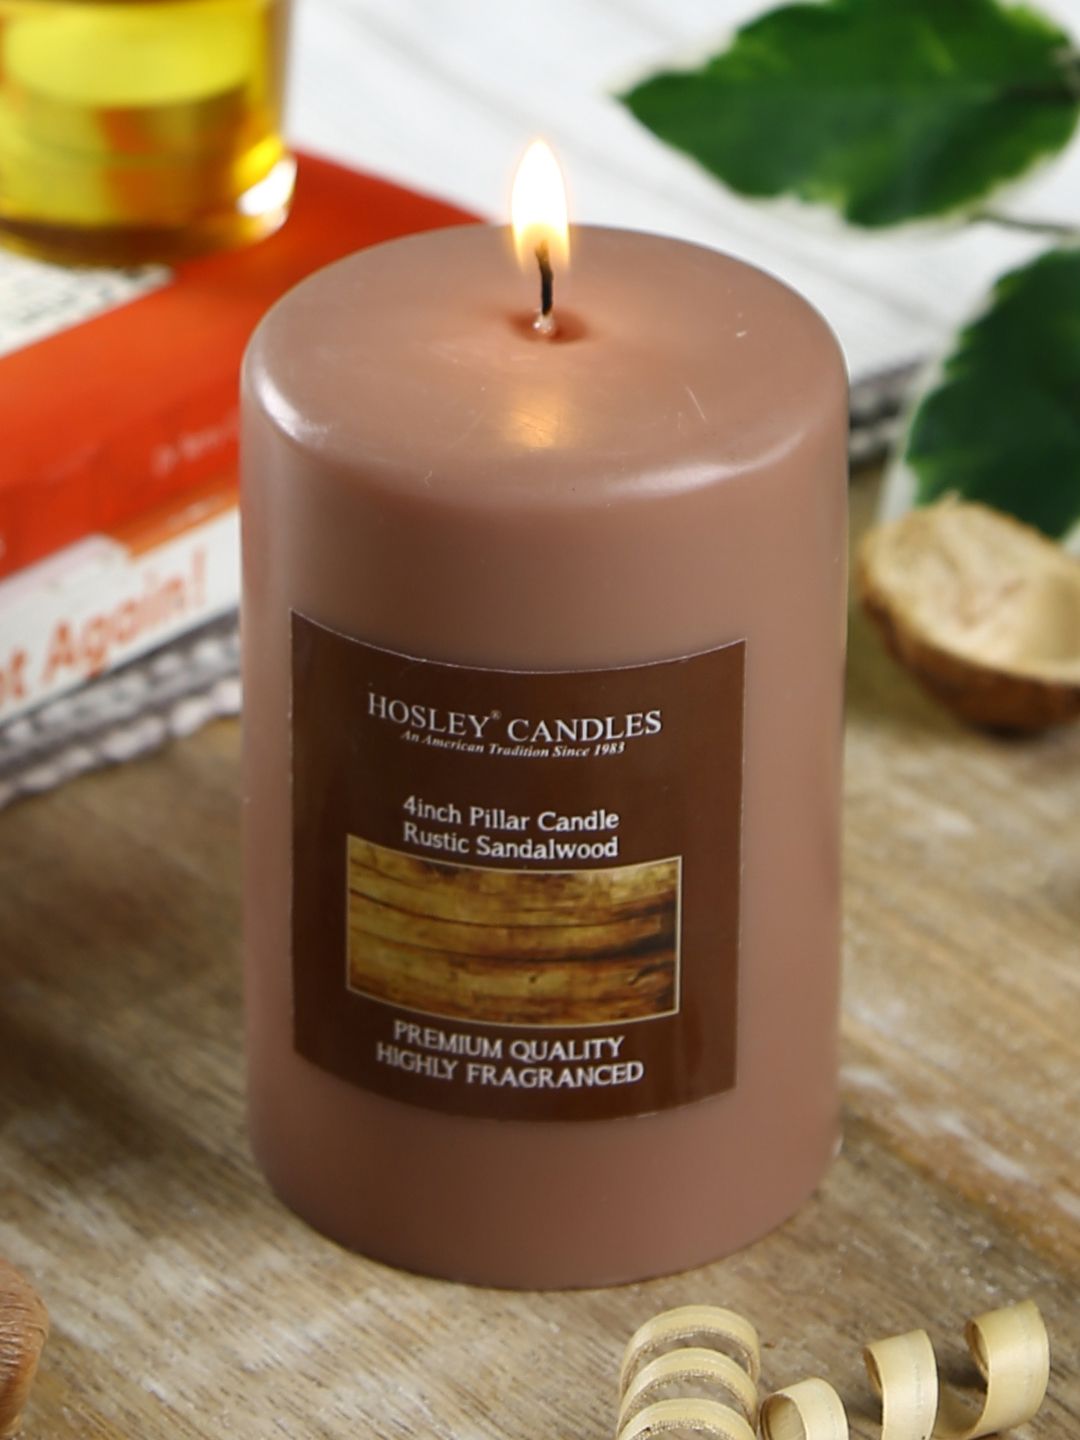 HOSLEY Brown Rustic Sandalwood Highly Fragranced 4inch Pillar Candle Price in India